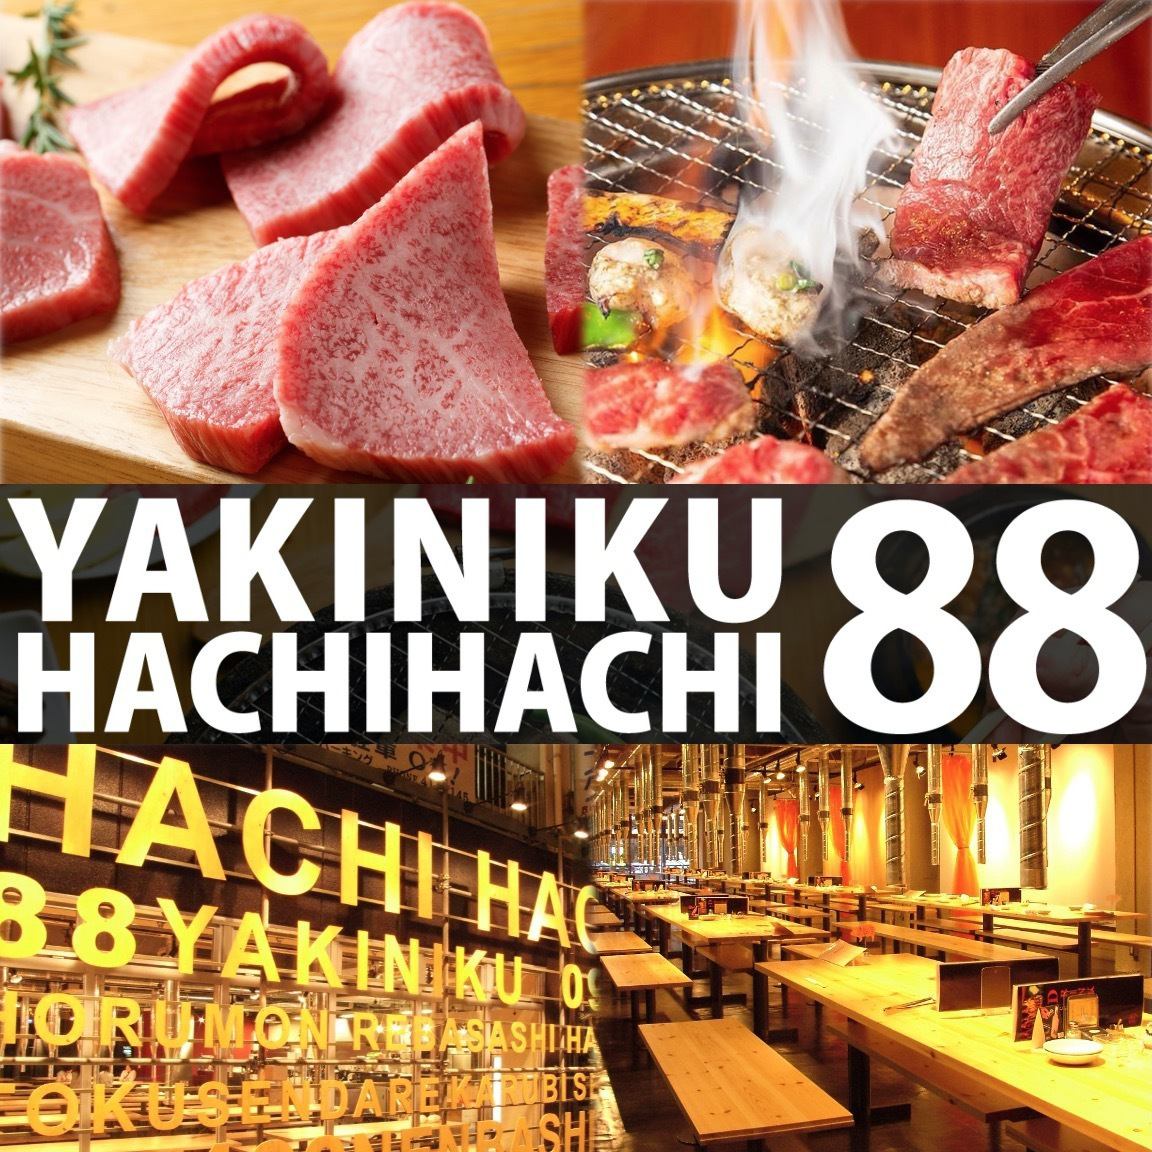 Japanese black beef A5 rank! We offer at a reasonable price.